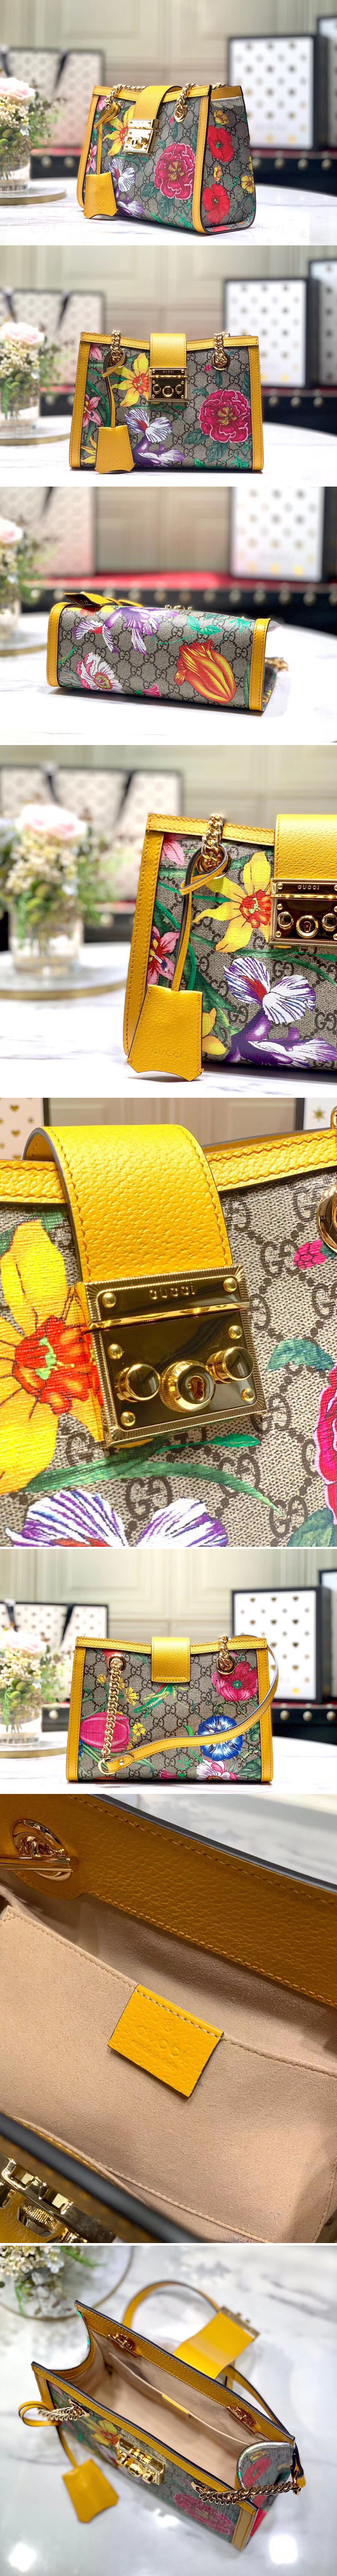 Replica Gucci 498156 Padlock GG Flora small shoulder bags Beige/ebony GG Supreme canvas With Yellow leather